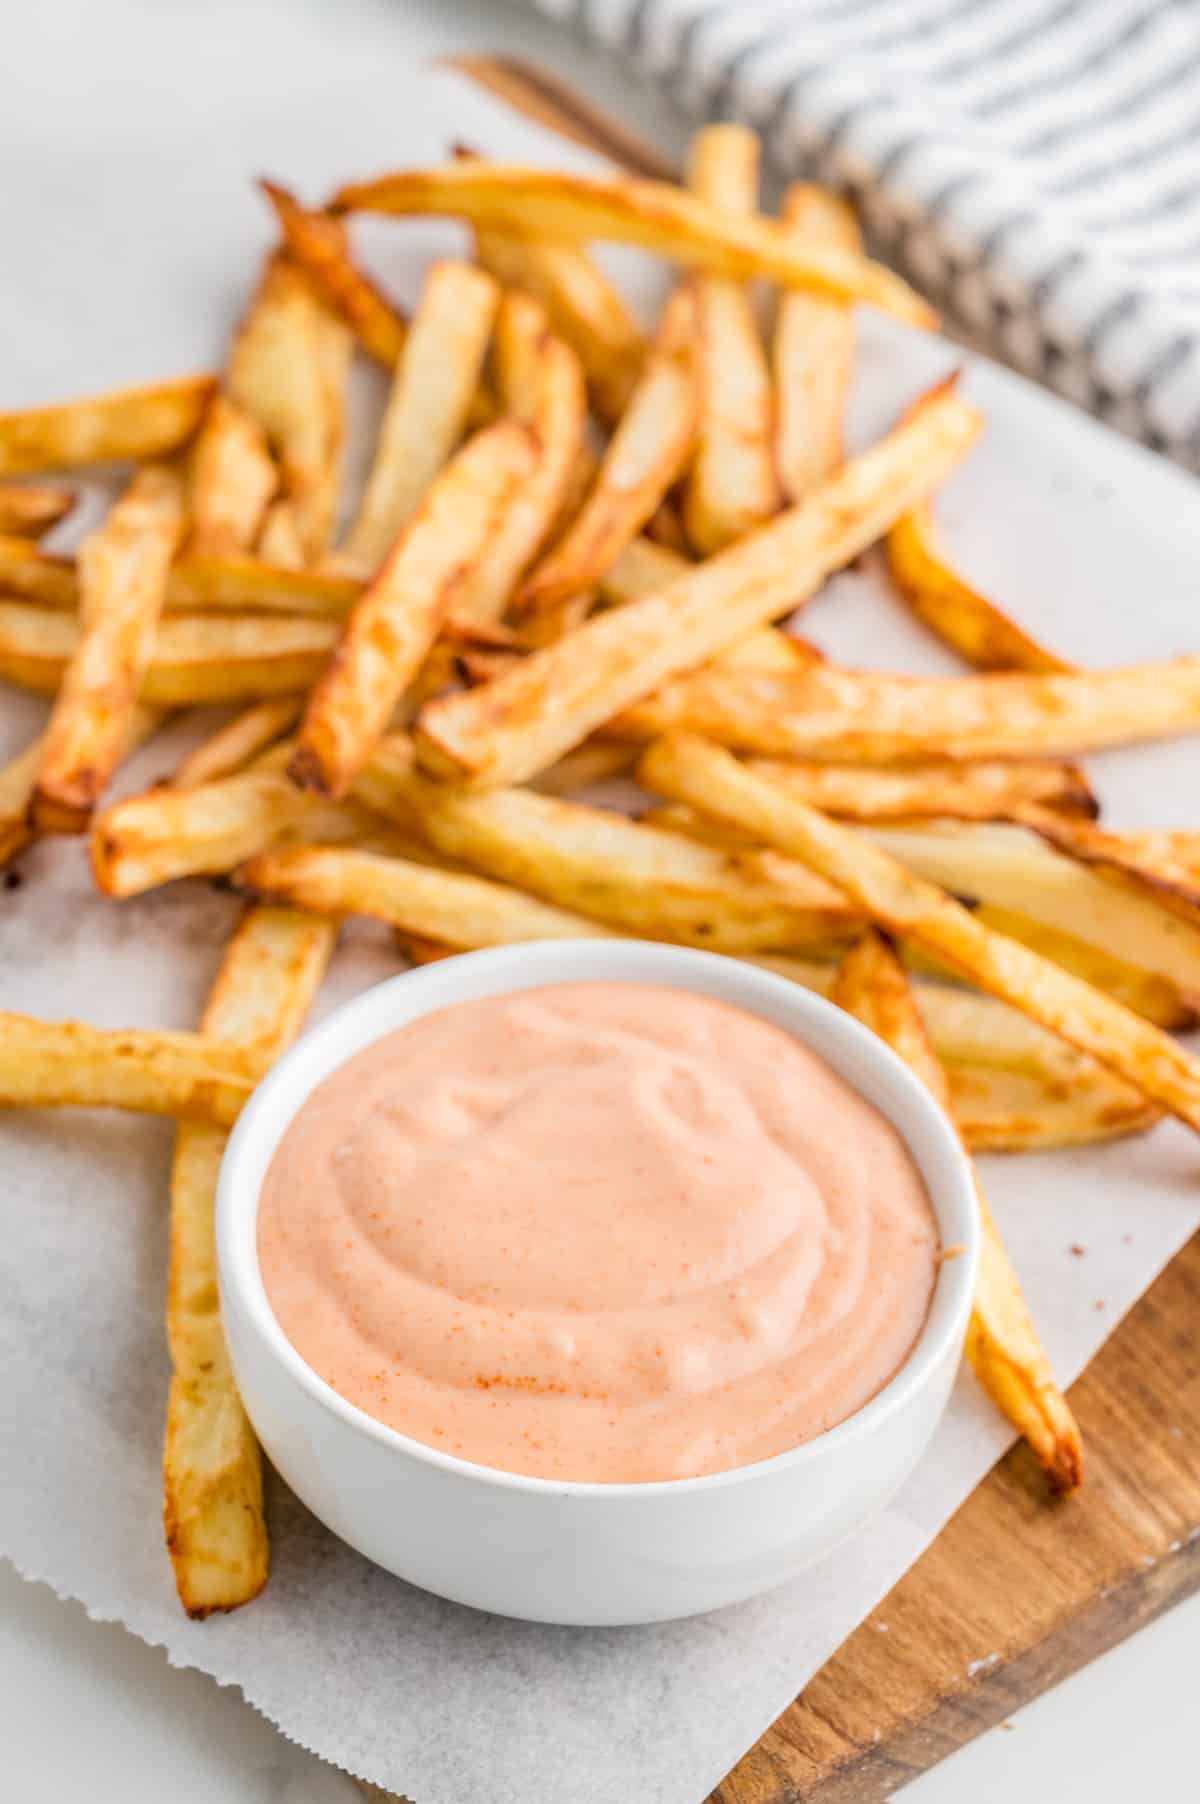 Fry Sauce in white bowl on parchment paper surrounded by french fries.